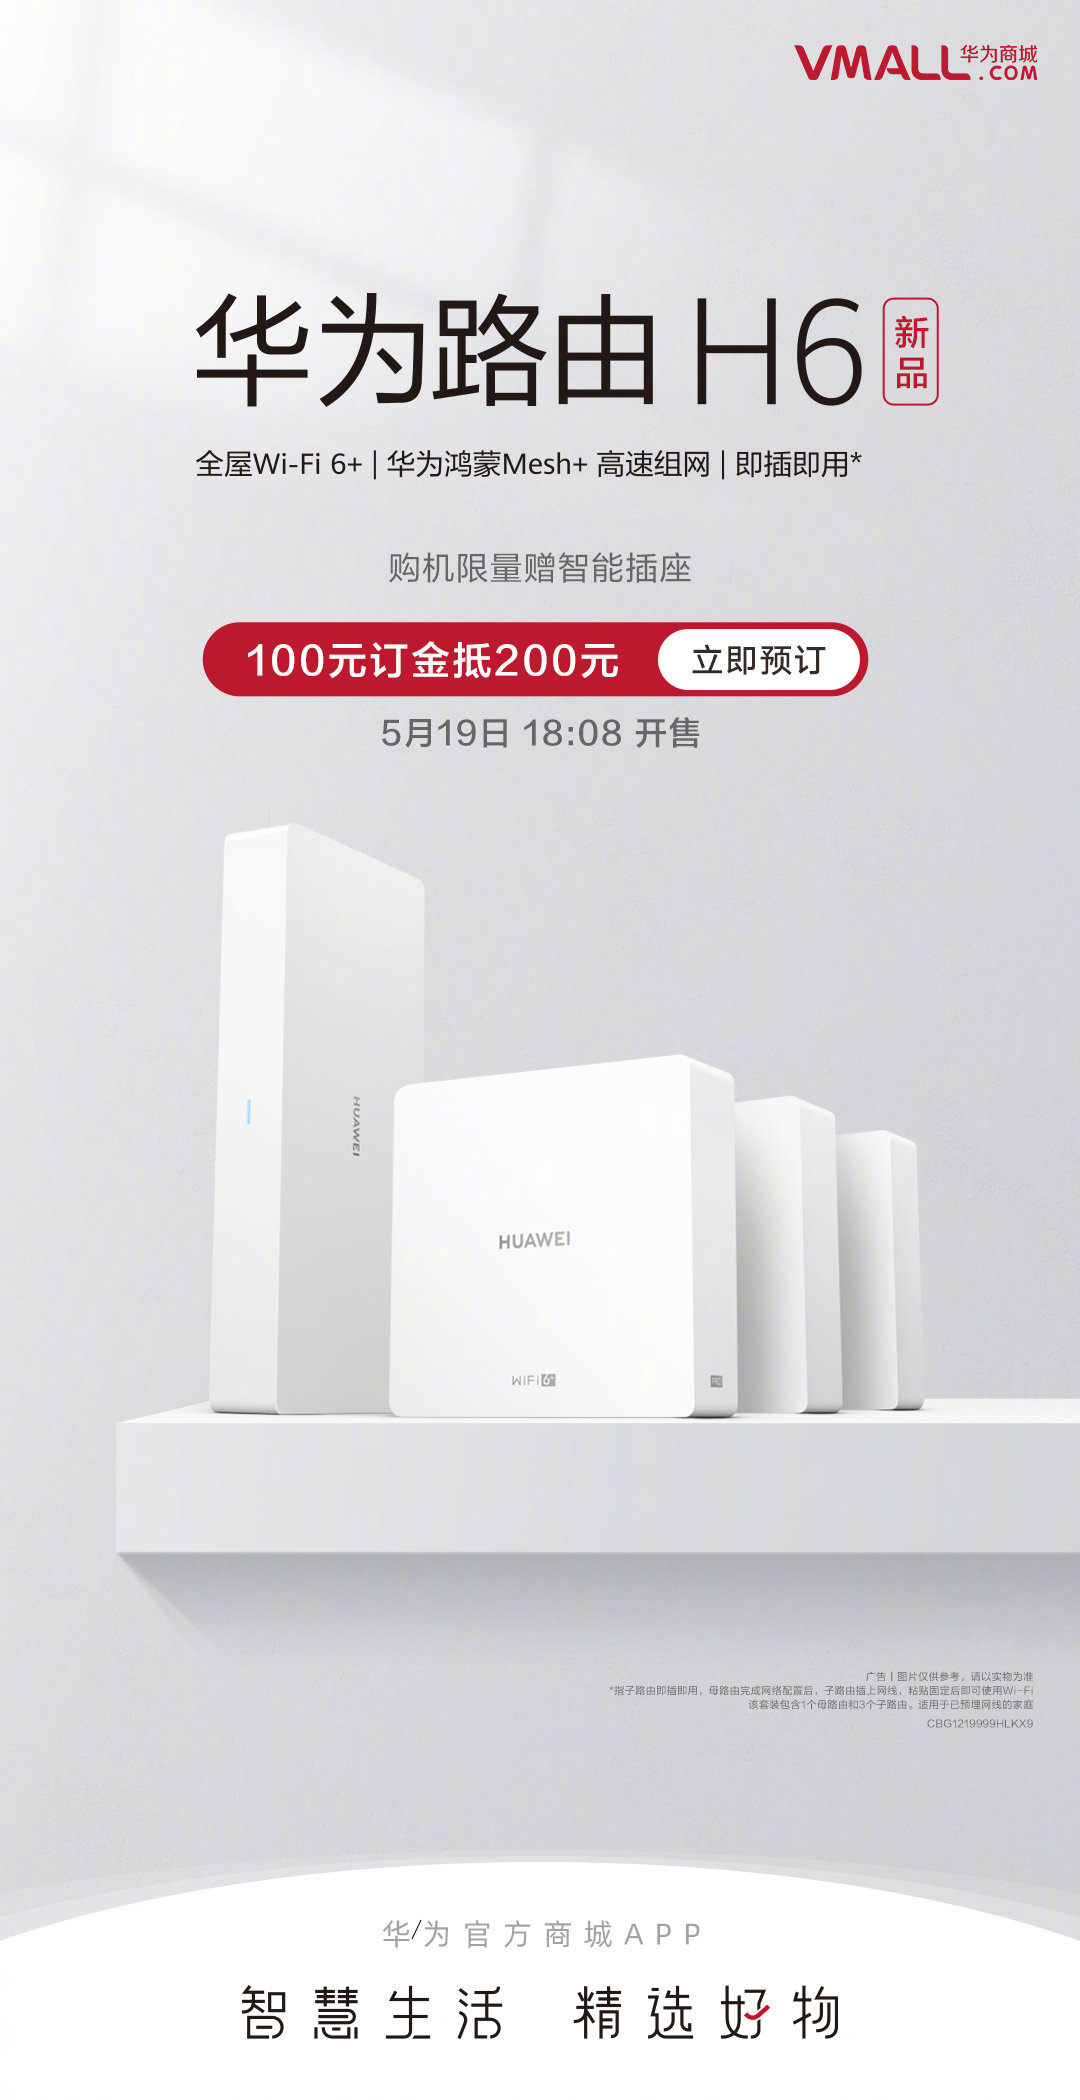 brug Niet modieus Valkuilen Huawei Router H6 running HarmonyOS now up for pre-sale in China - Gizmochina